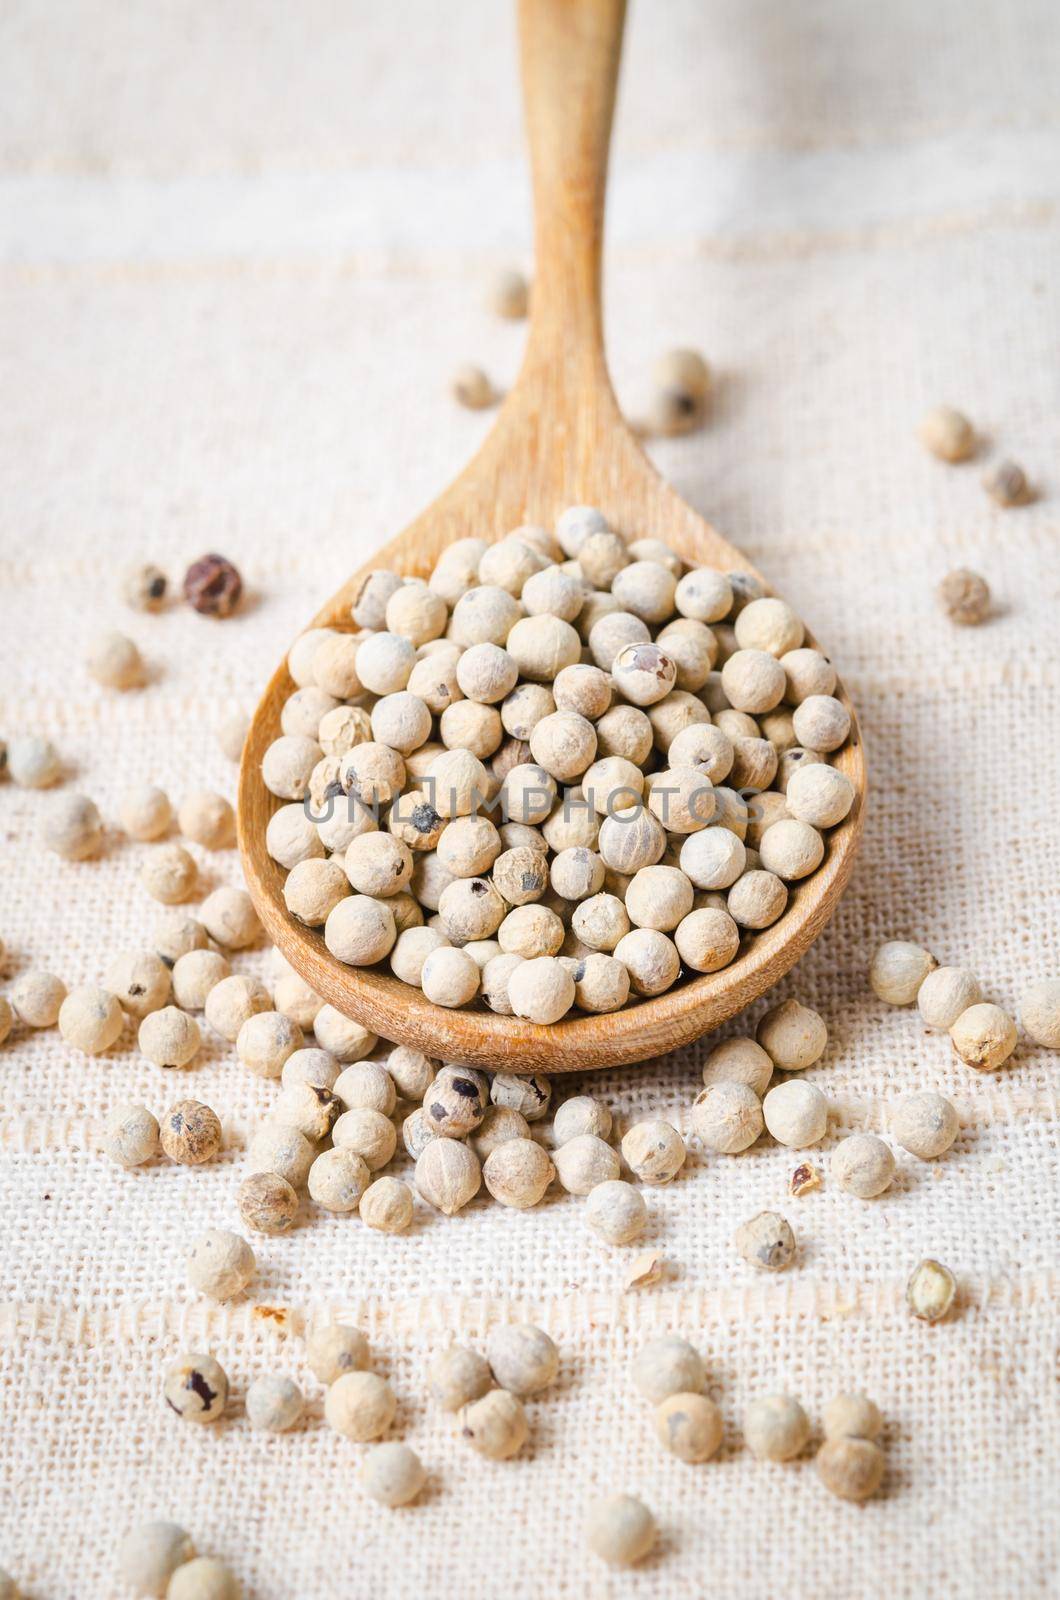 The White pepper seeds (peppercorn) in wooden spoon on tablecloth background.